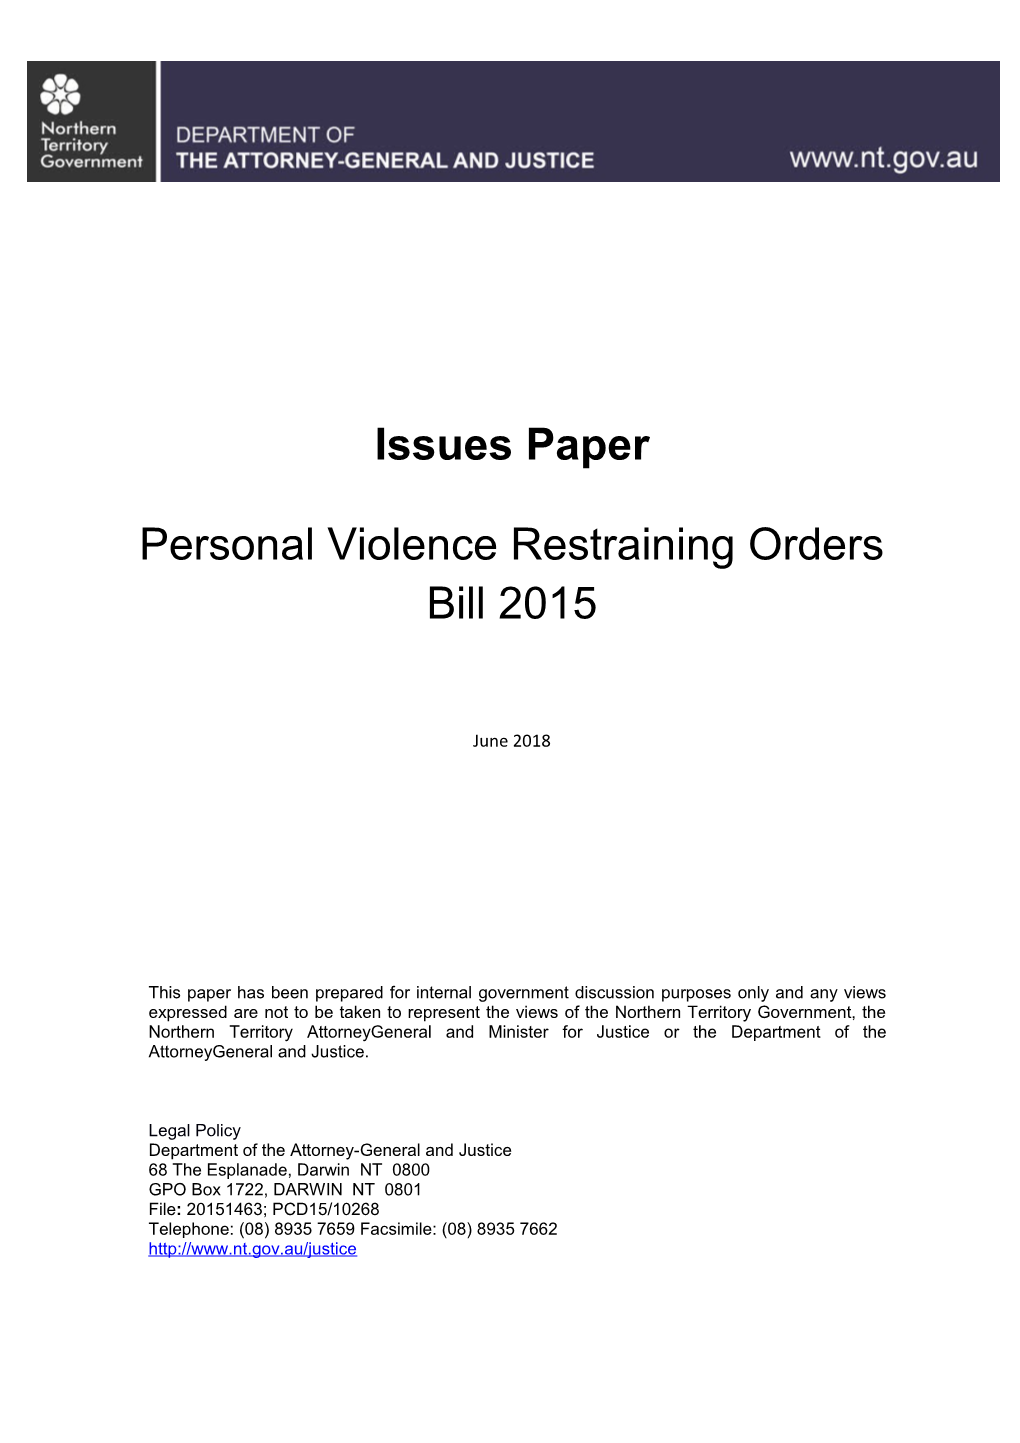 Issues Paper on the Personal Violence Restraining Orders Bill 2015